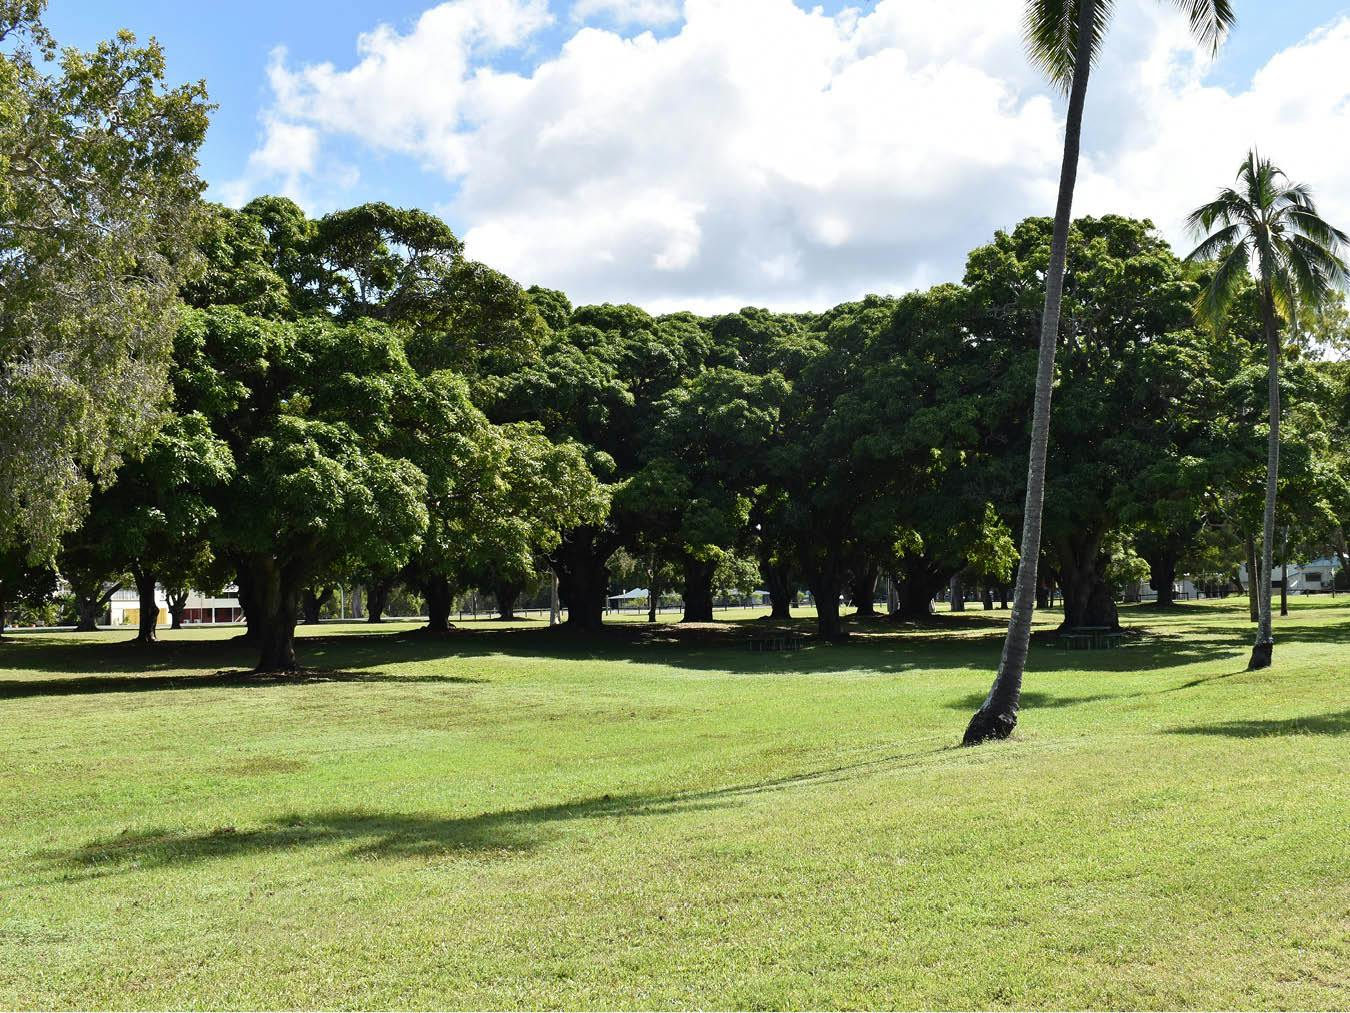 View from the pedestrian track at Intersection 4. The photograph is looking east along Seaforth Esplanade Road towards the camping grounds. 